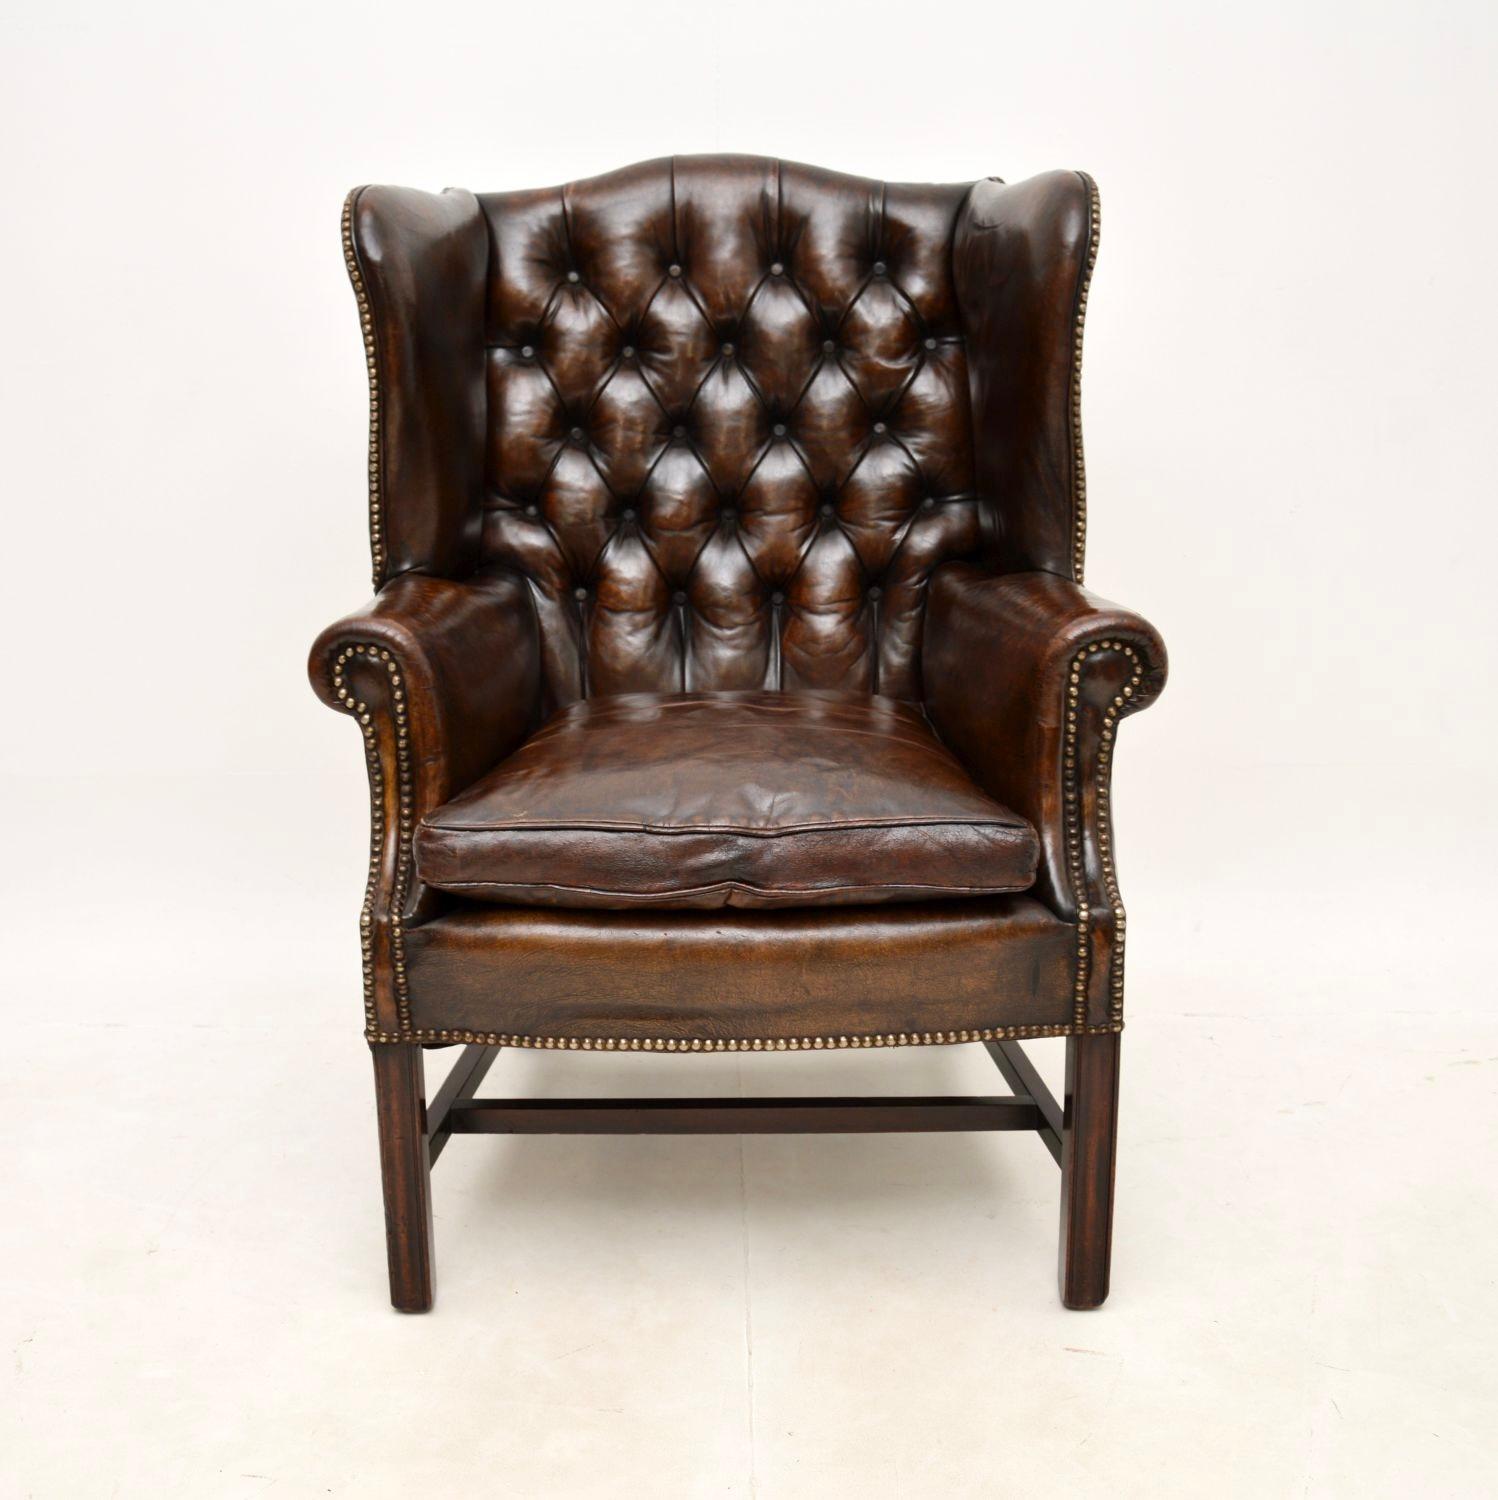 A fantastic antique leather wing back armchair. This was made in England, it dates from around the 1890-1910 period.

It is of superb quality with lovely proportions, it is very comfortable to relax in. The deep buttoned leather upholstery is all